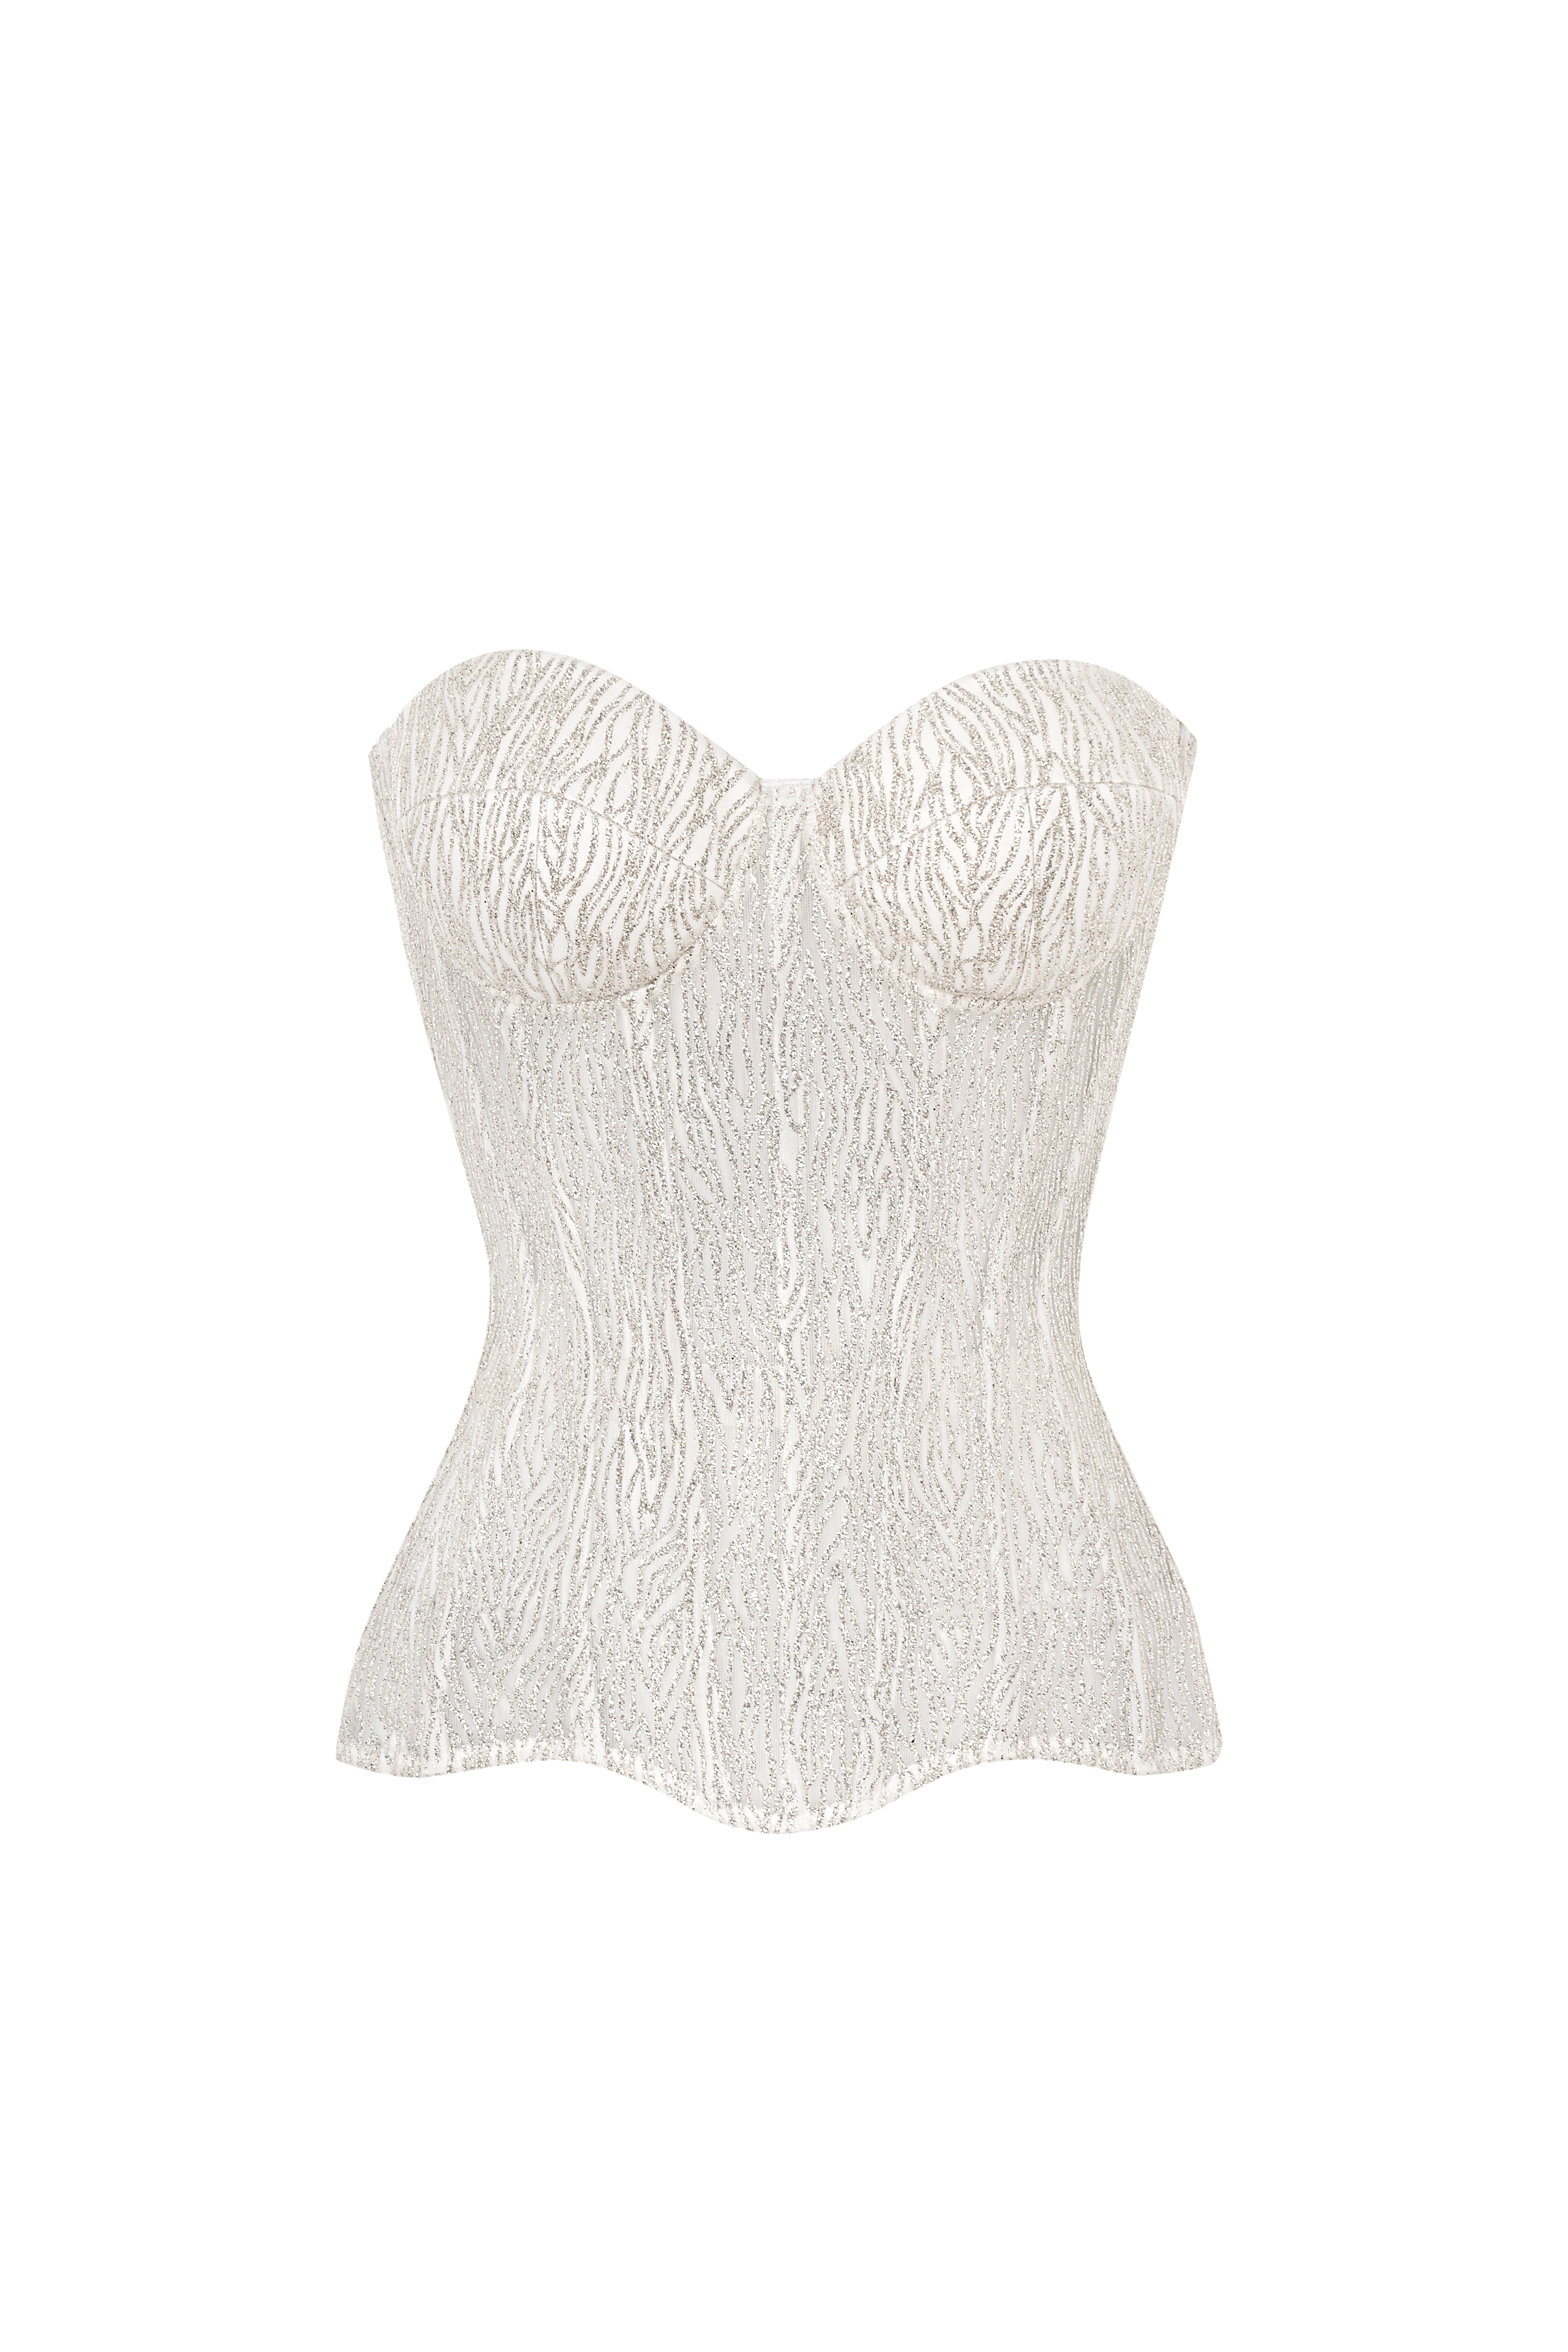 Shiny white wave corset with cups - STATNAIA